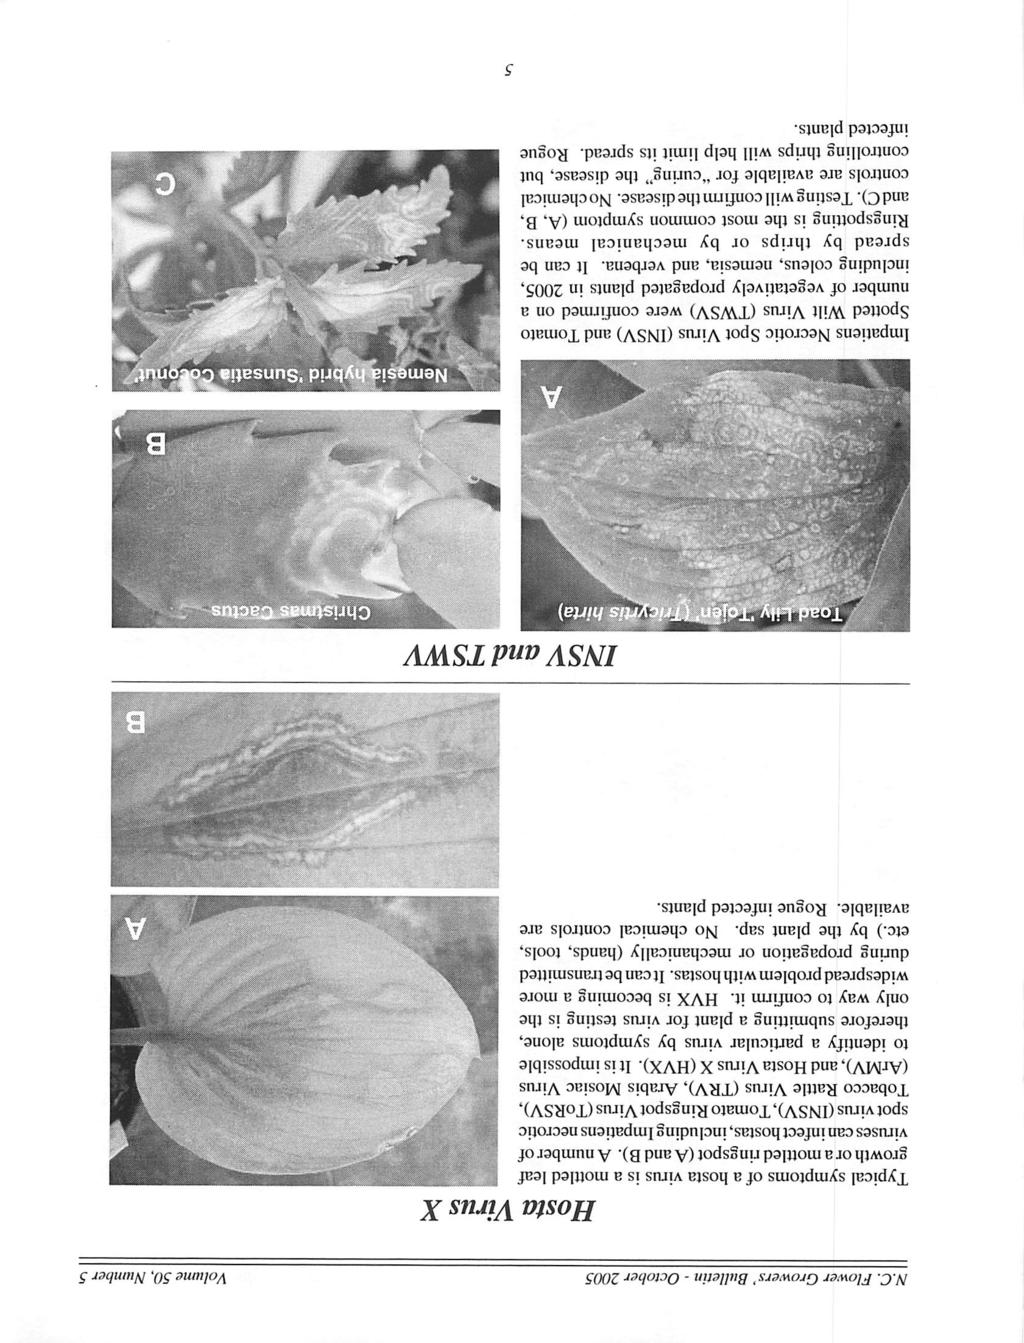 N.C. Flower Growers' Bulletin - October 2005 Volume 50, Number 5 Hosta Virus X Typical symptoms of a hosta virus is a mottled leaf growth or a mottled ringspot (A and B).